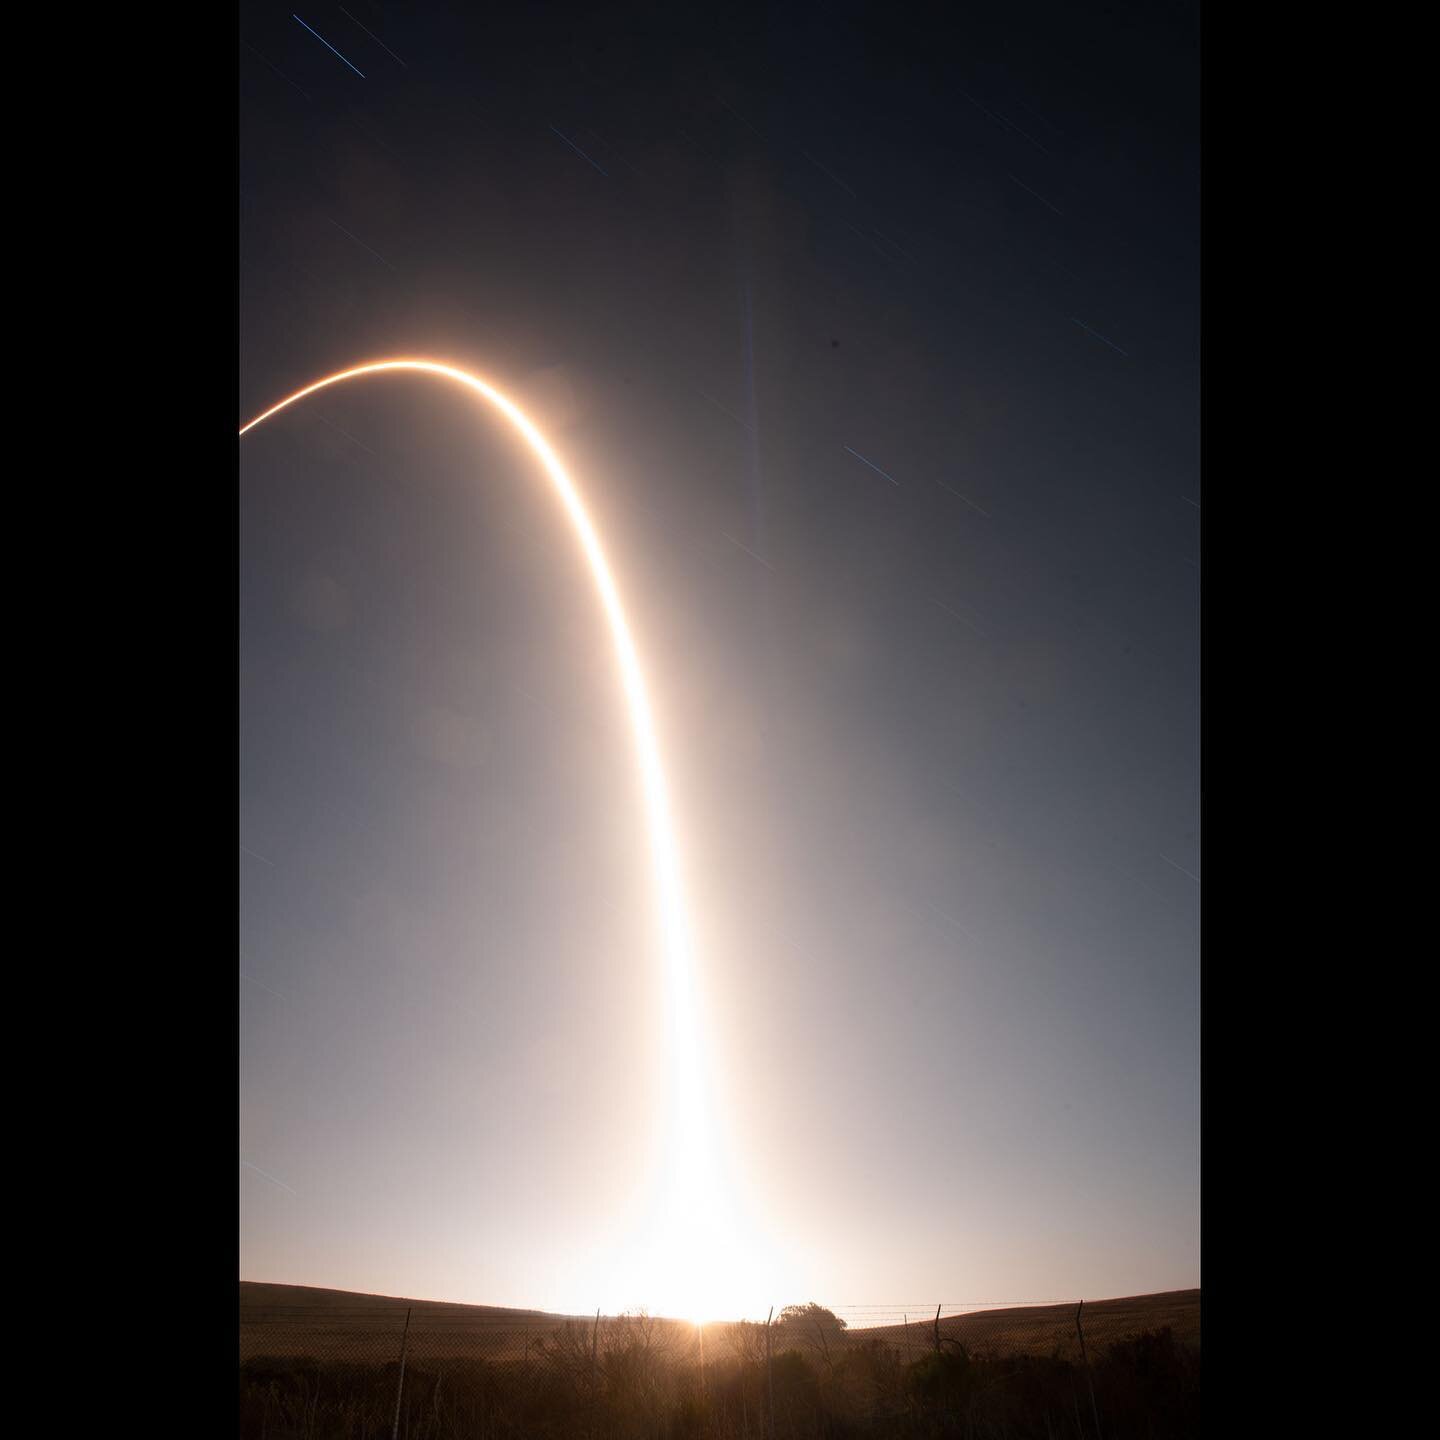 @spacex launched a Falcon 9 Rocket from Vandenberg Air Force Base on August 30, 2022.